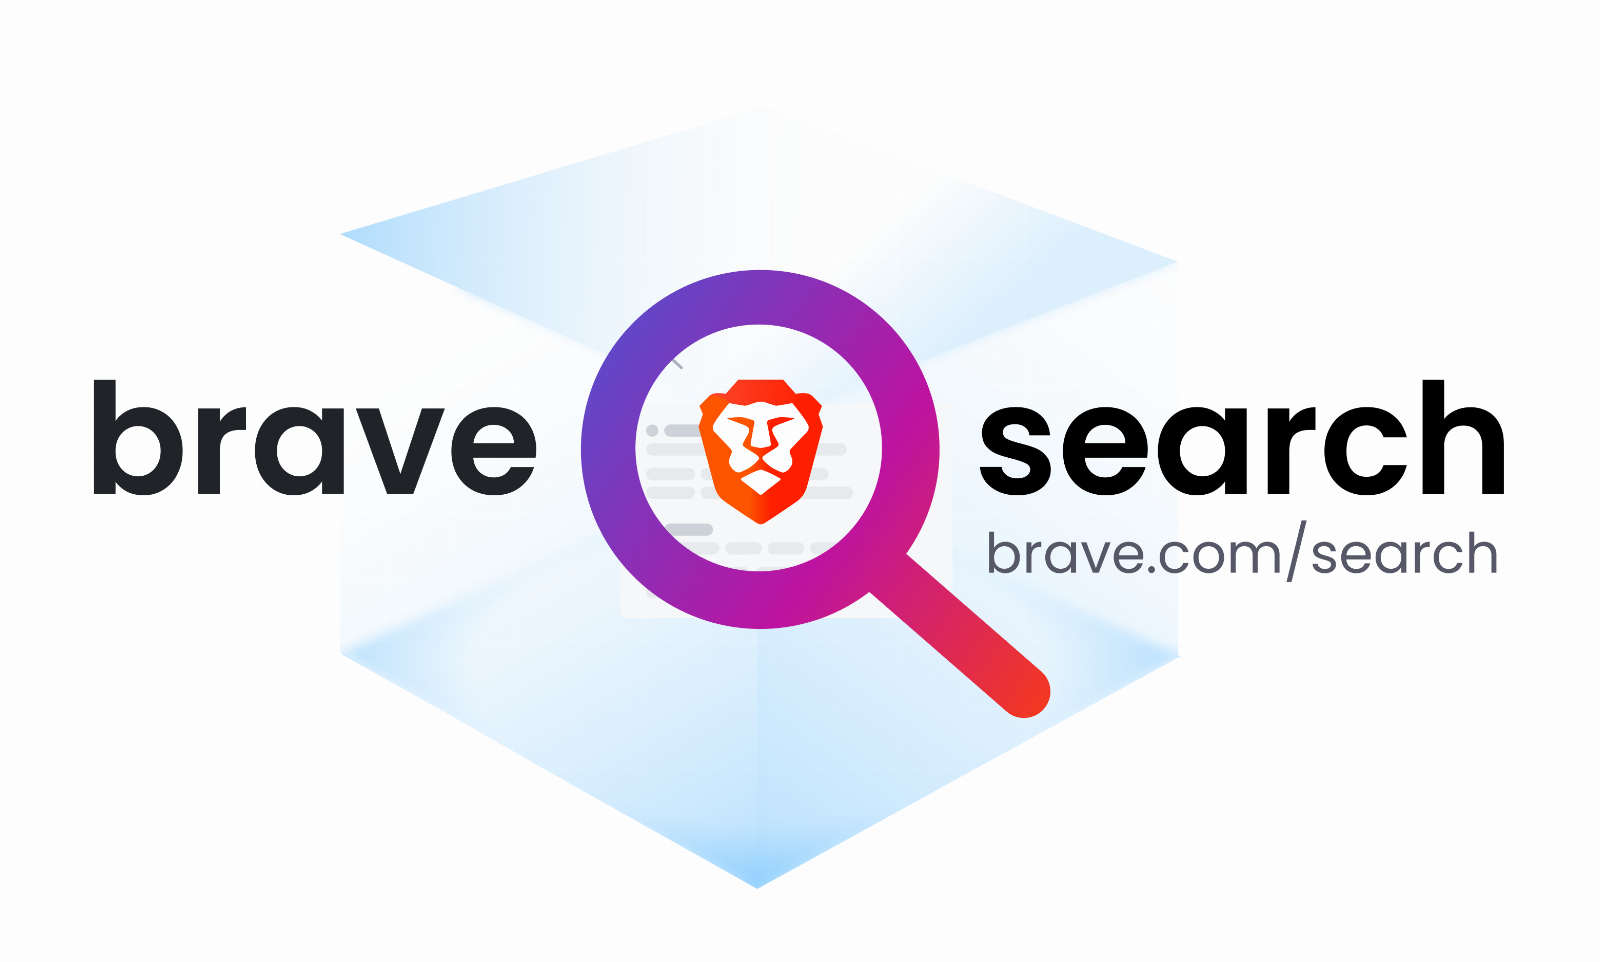 Brave Search can now deliver results for programming queries